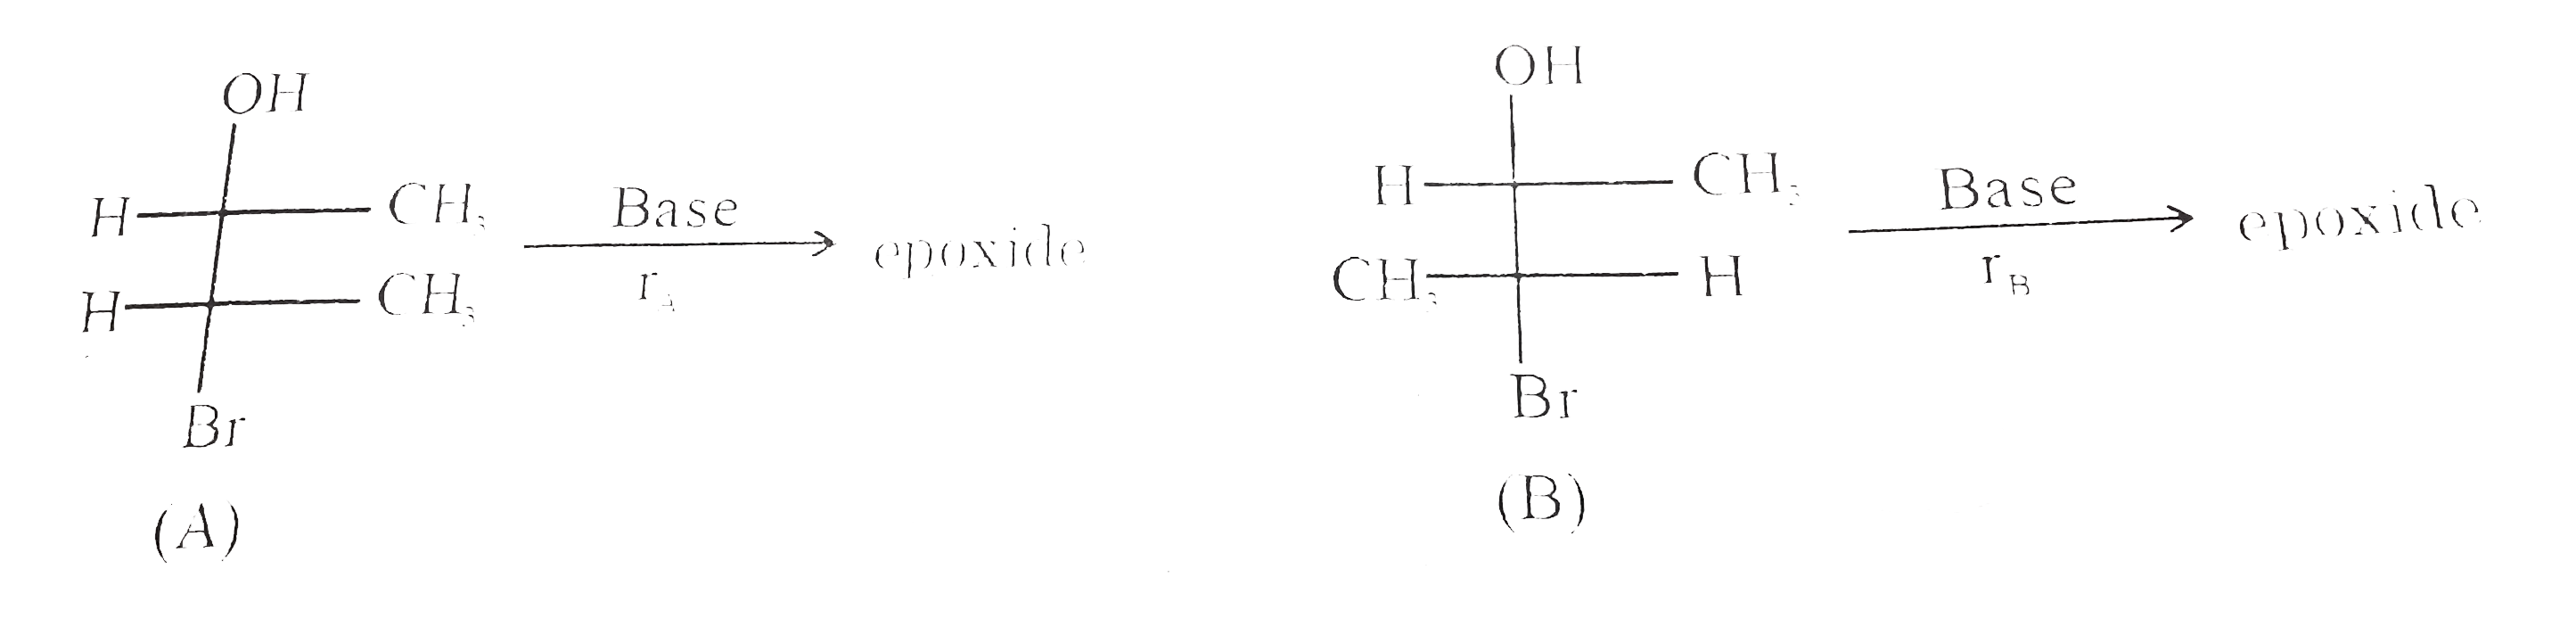 Two stereoisomers (Shown in fischer projection ) from an epoxide, when treated with base.      r(A) and r(B) are rate of epoxide formation for compound (A) and compound(B) with base. Identify the correct option?